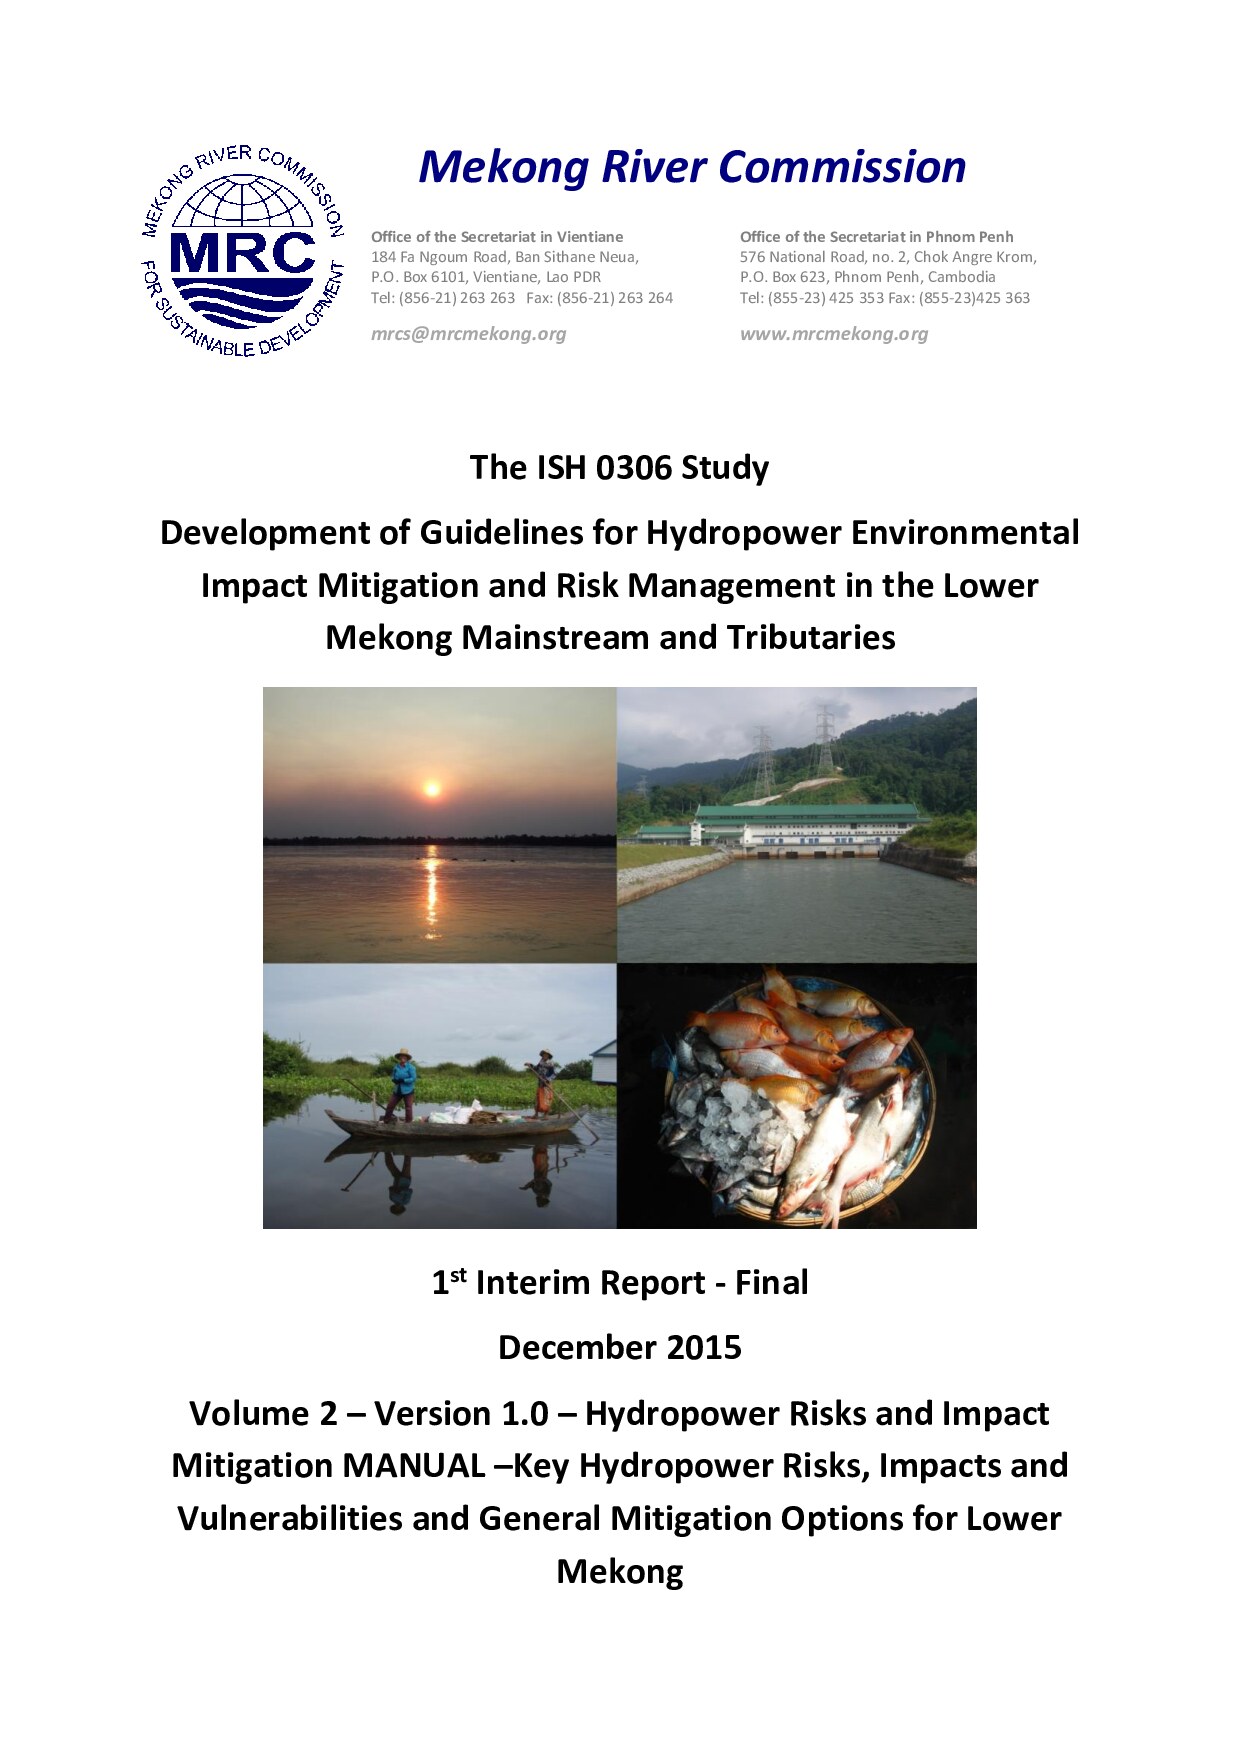 Development of Guidelines for Hydropower Environmental Impact Mitigation and Risk Management in the Lower Mekong Mainstream and Tributaries 1st Interim Report – Final: Vol.2 – Version 1.0